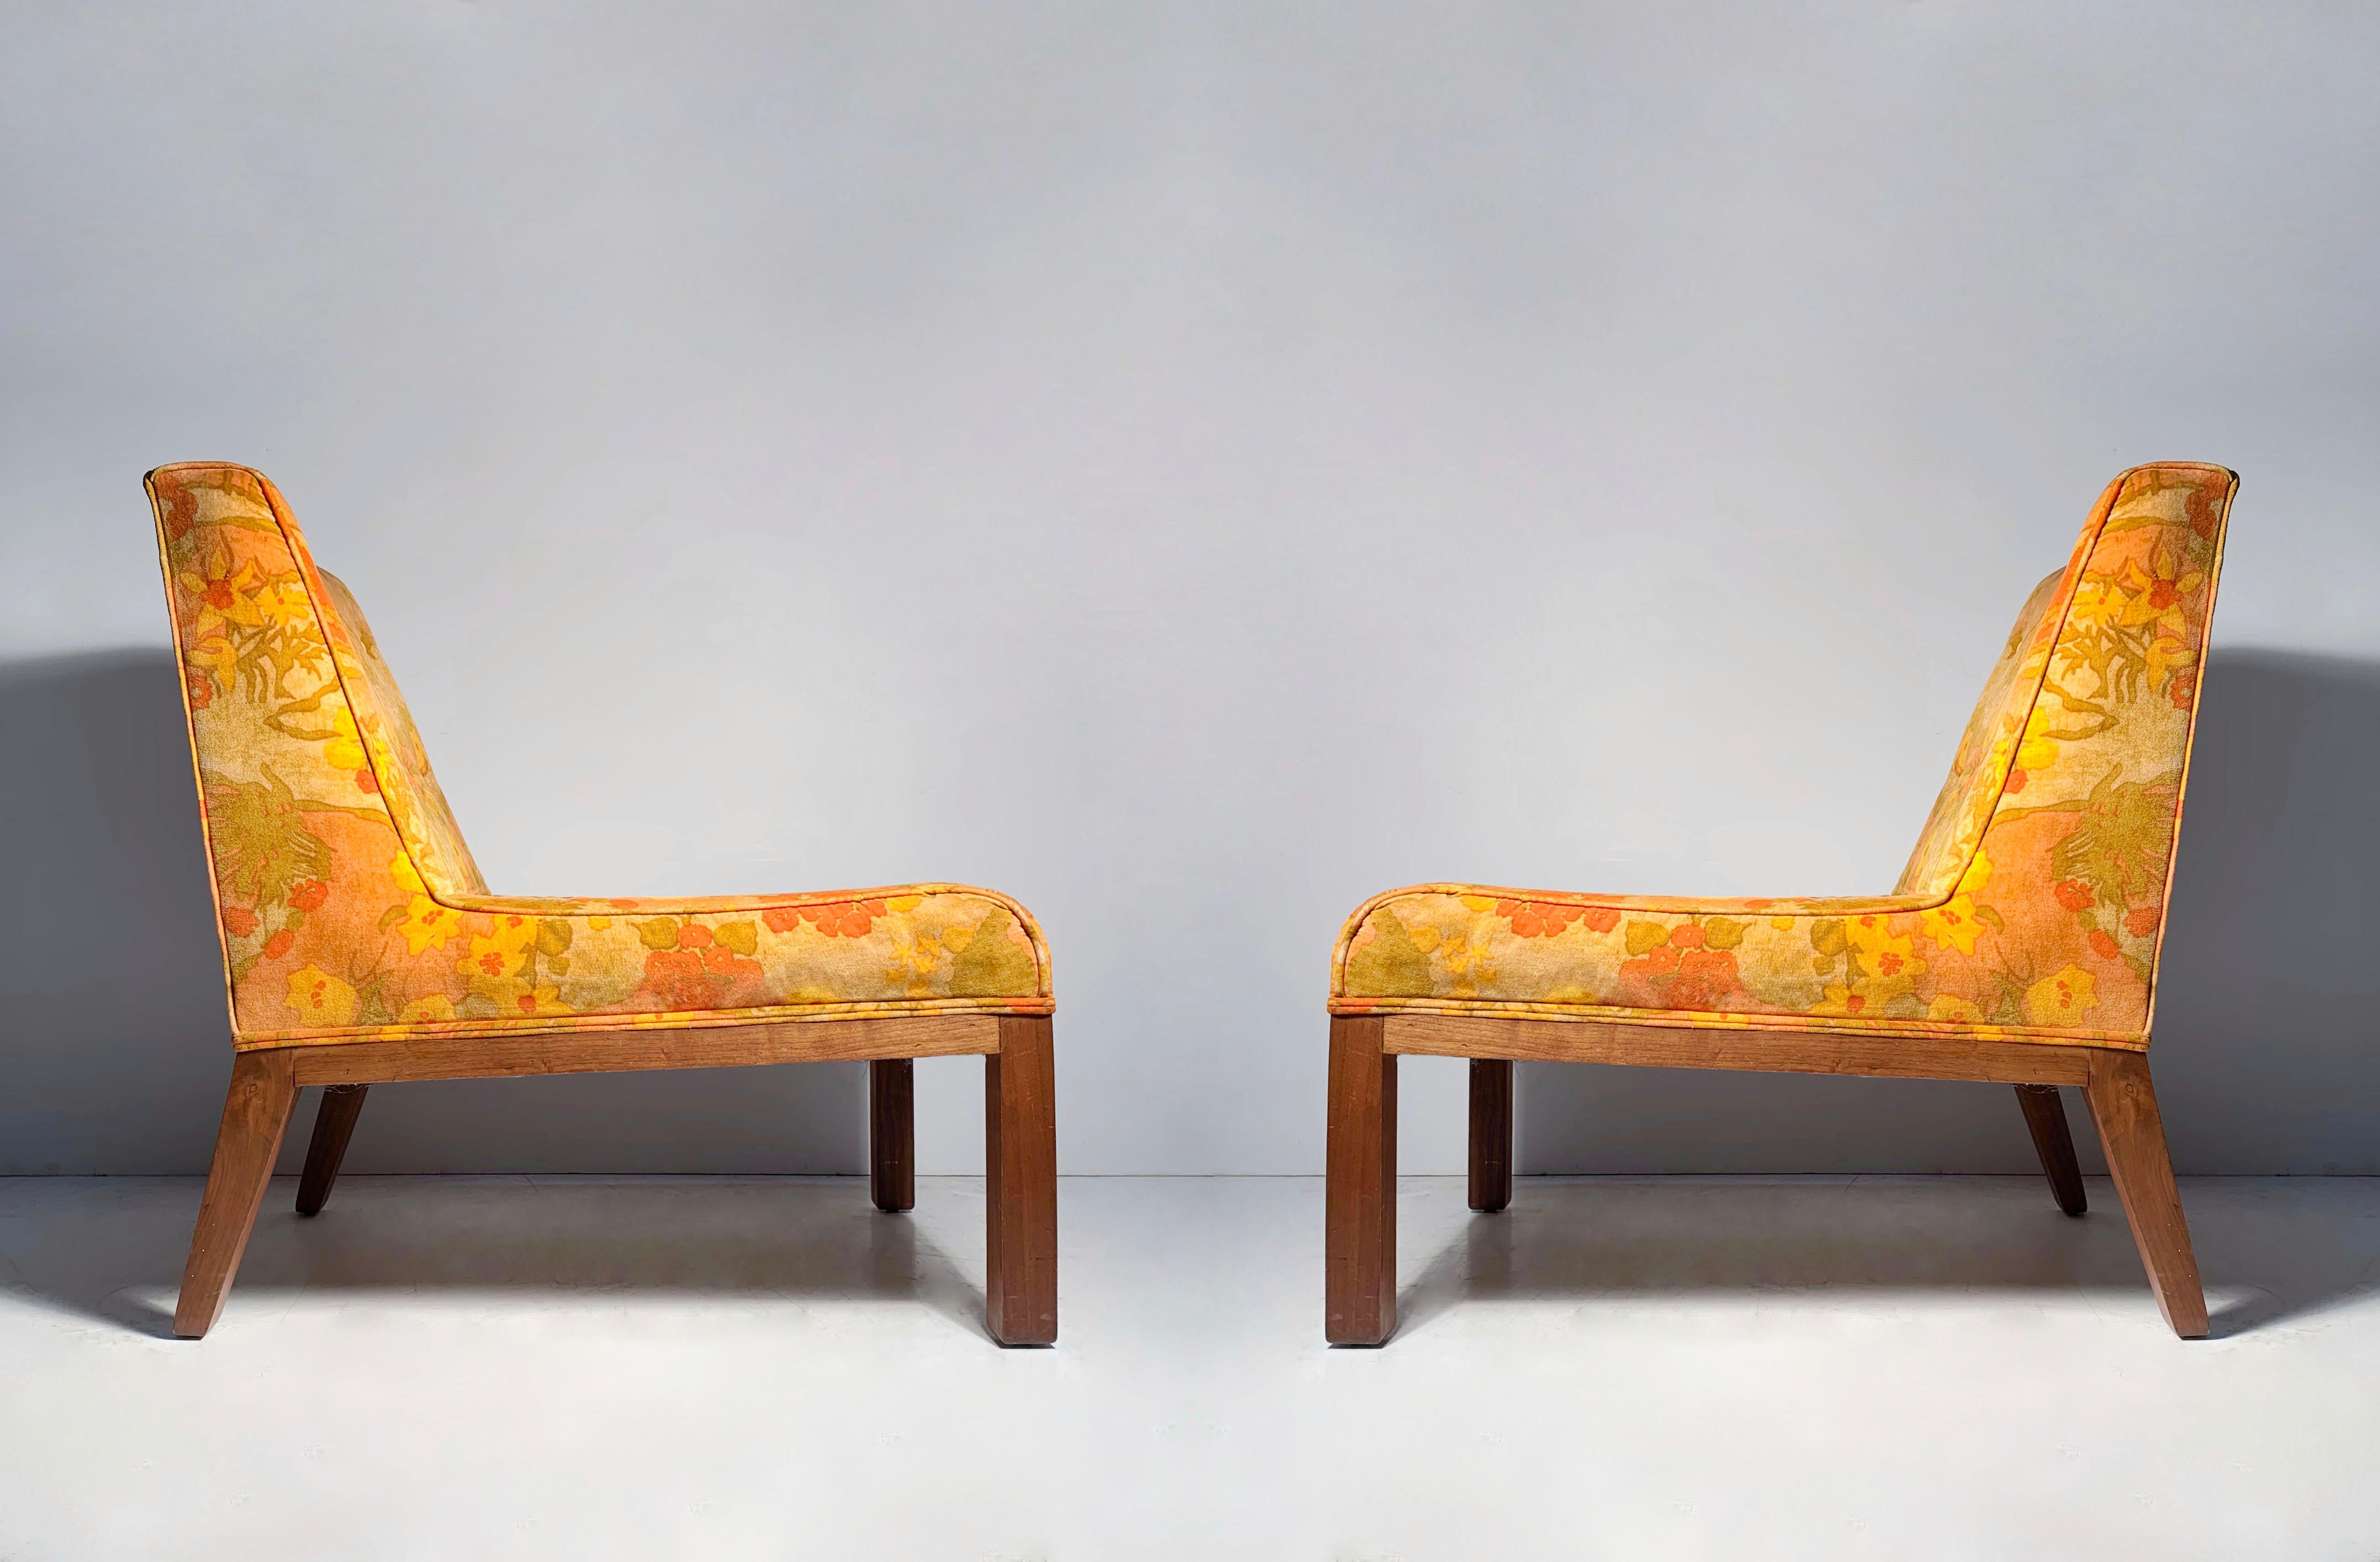 Vintage Pair of Velvet Slipper Chairs in manner of Edward Wormley for Dunbar.  High quality wood Parsons Leg Design construction.  These are being sold with the original upholstery that is attributed to Anthony Ballatore for Jack Lenor Larsen. There